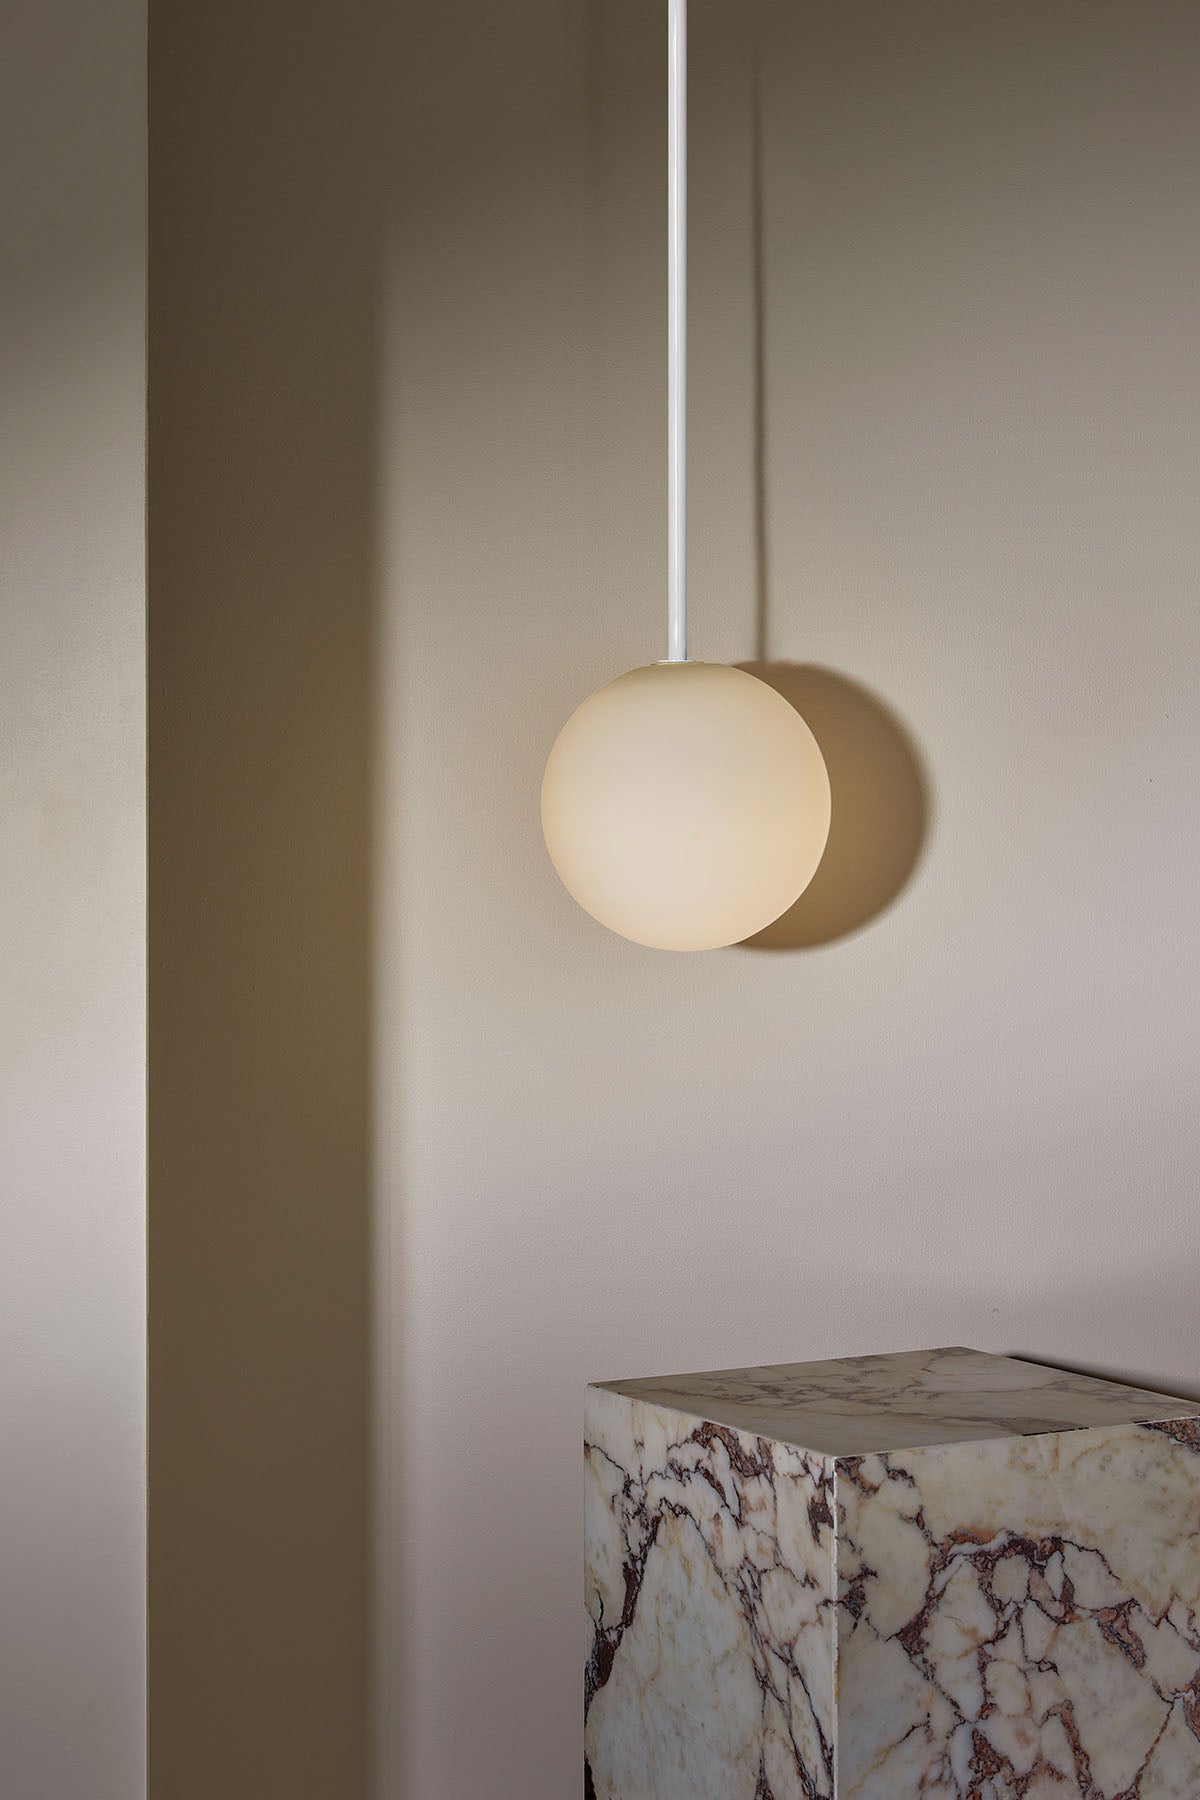 Orb Pendant, Large in White Satin and White Frosted. Image by Lawrence Furzey